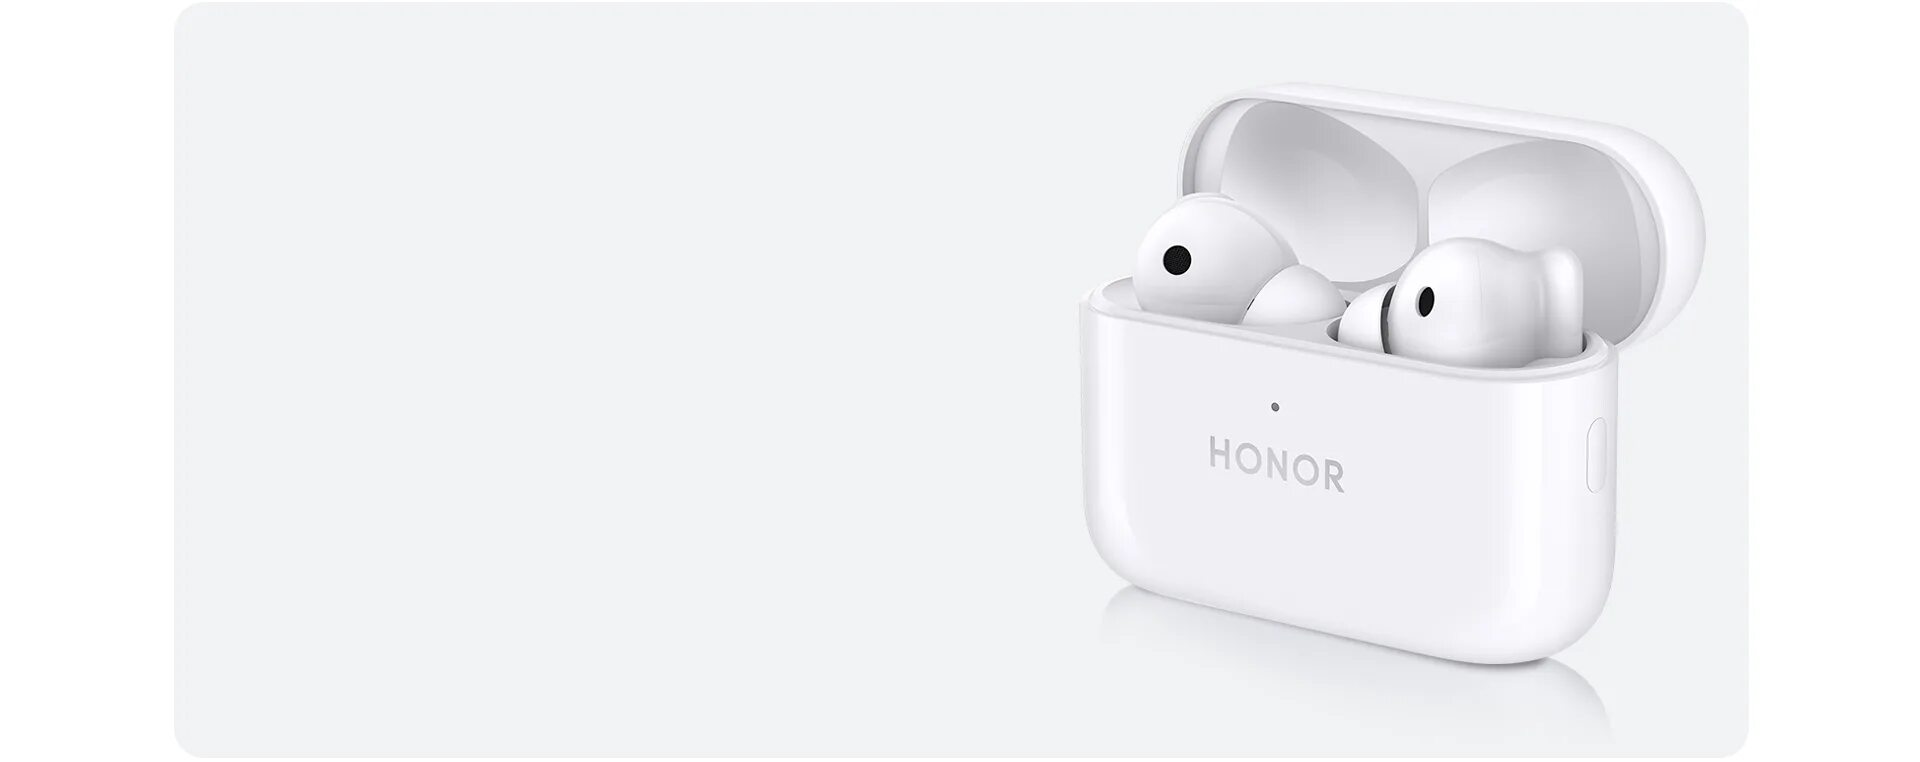 Honor earbuds сравнение. Honor Earbuds 2 Lite. Honor Magic Earbuds 2 Lite. Наушники Honor Earbuds 2 Lite. TWS Honor Earbuds 2 se белый.